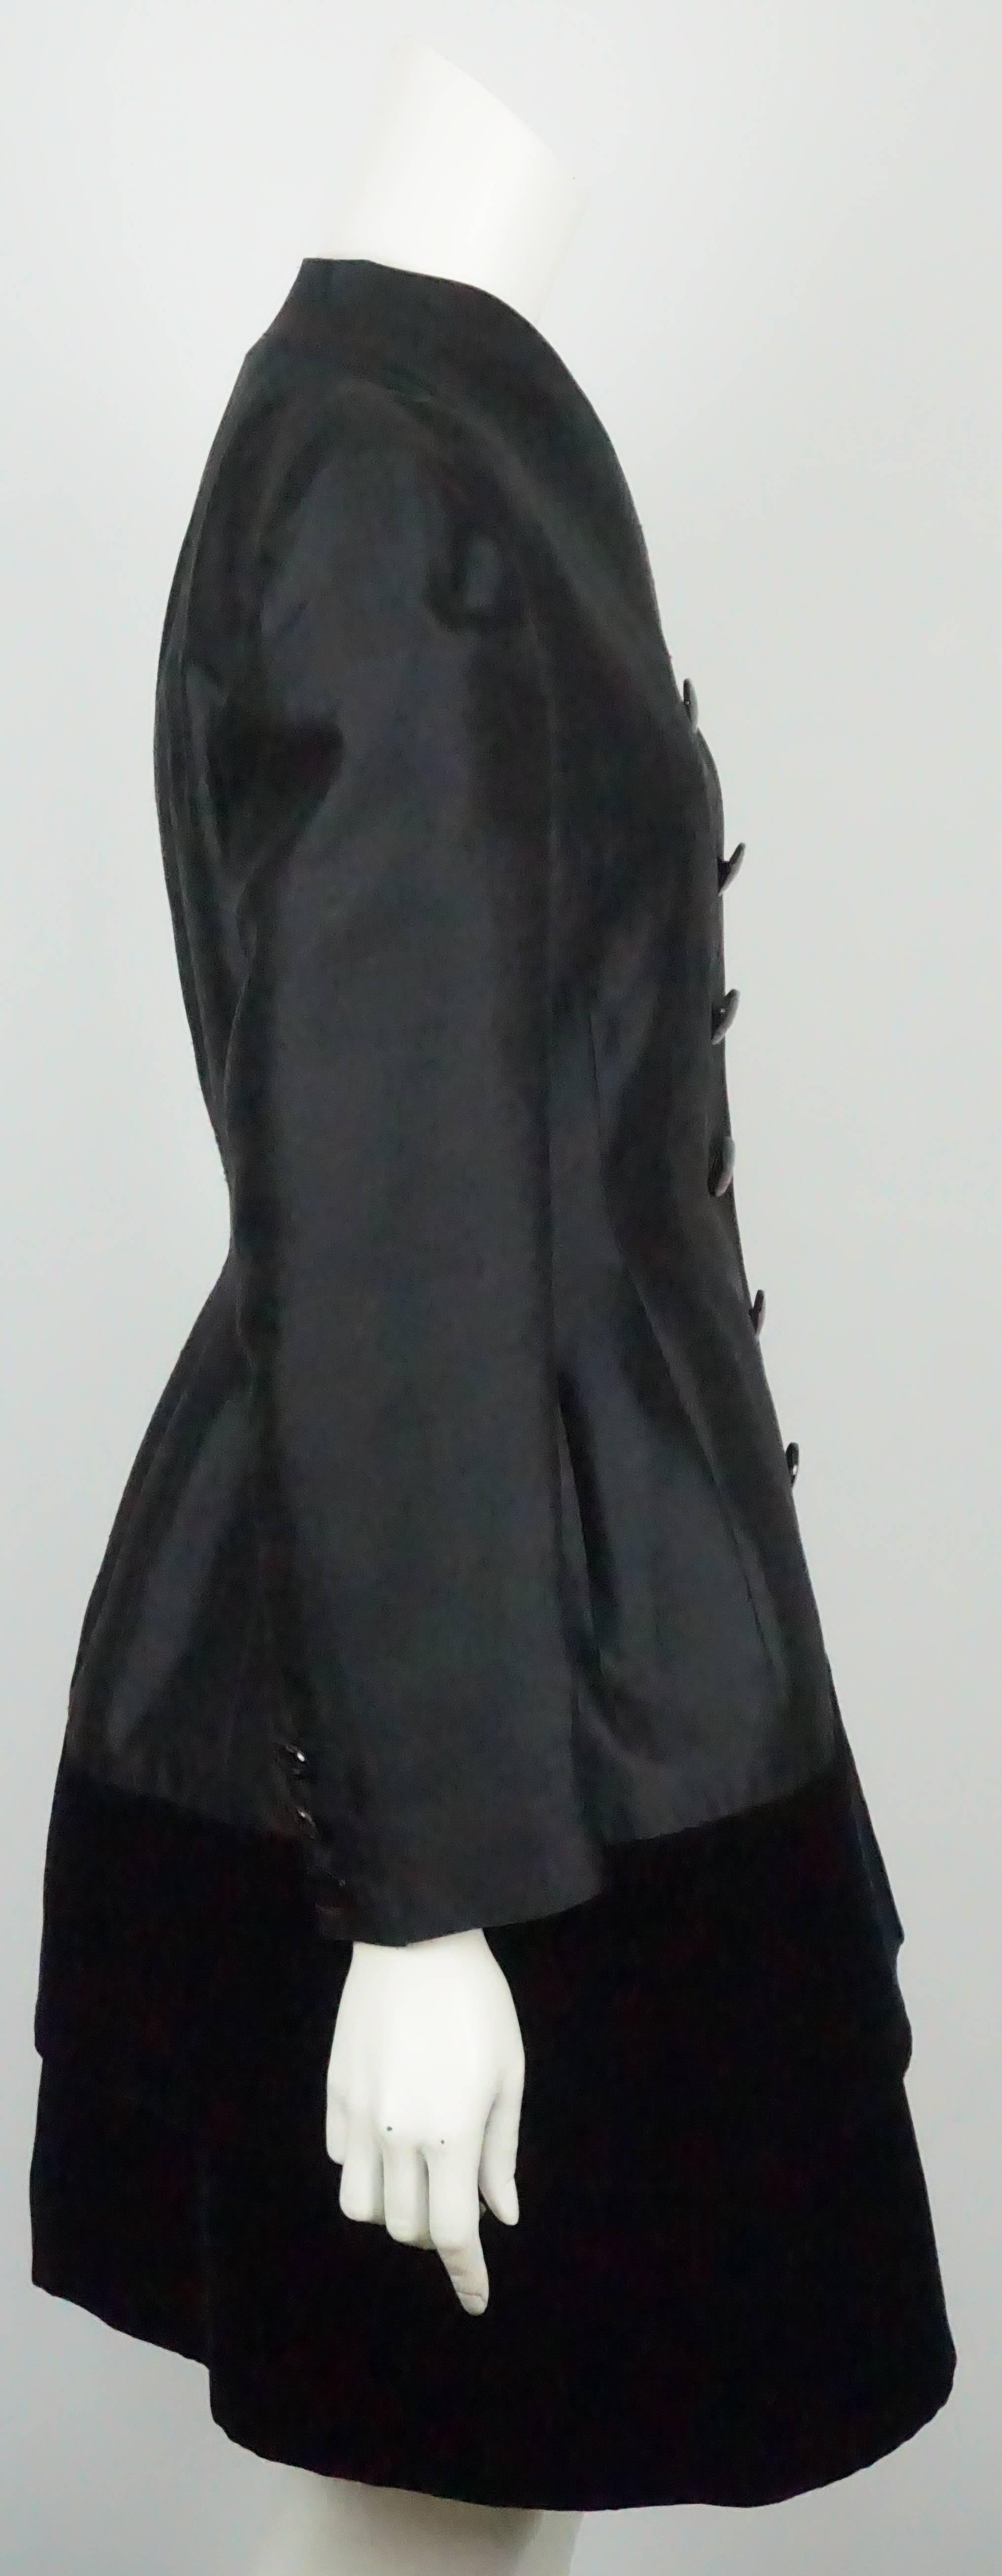 Valentino Black Silk and Velvet Dress with Coat - 10 - Circa 80's  This spectacular and timeless vintage dress and coat is in excellent condition with the exception of one button missing on the coat. The silk dress is sleeveless and has a velvet